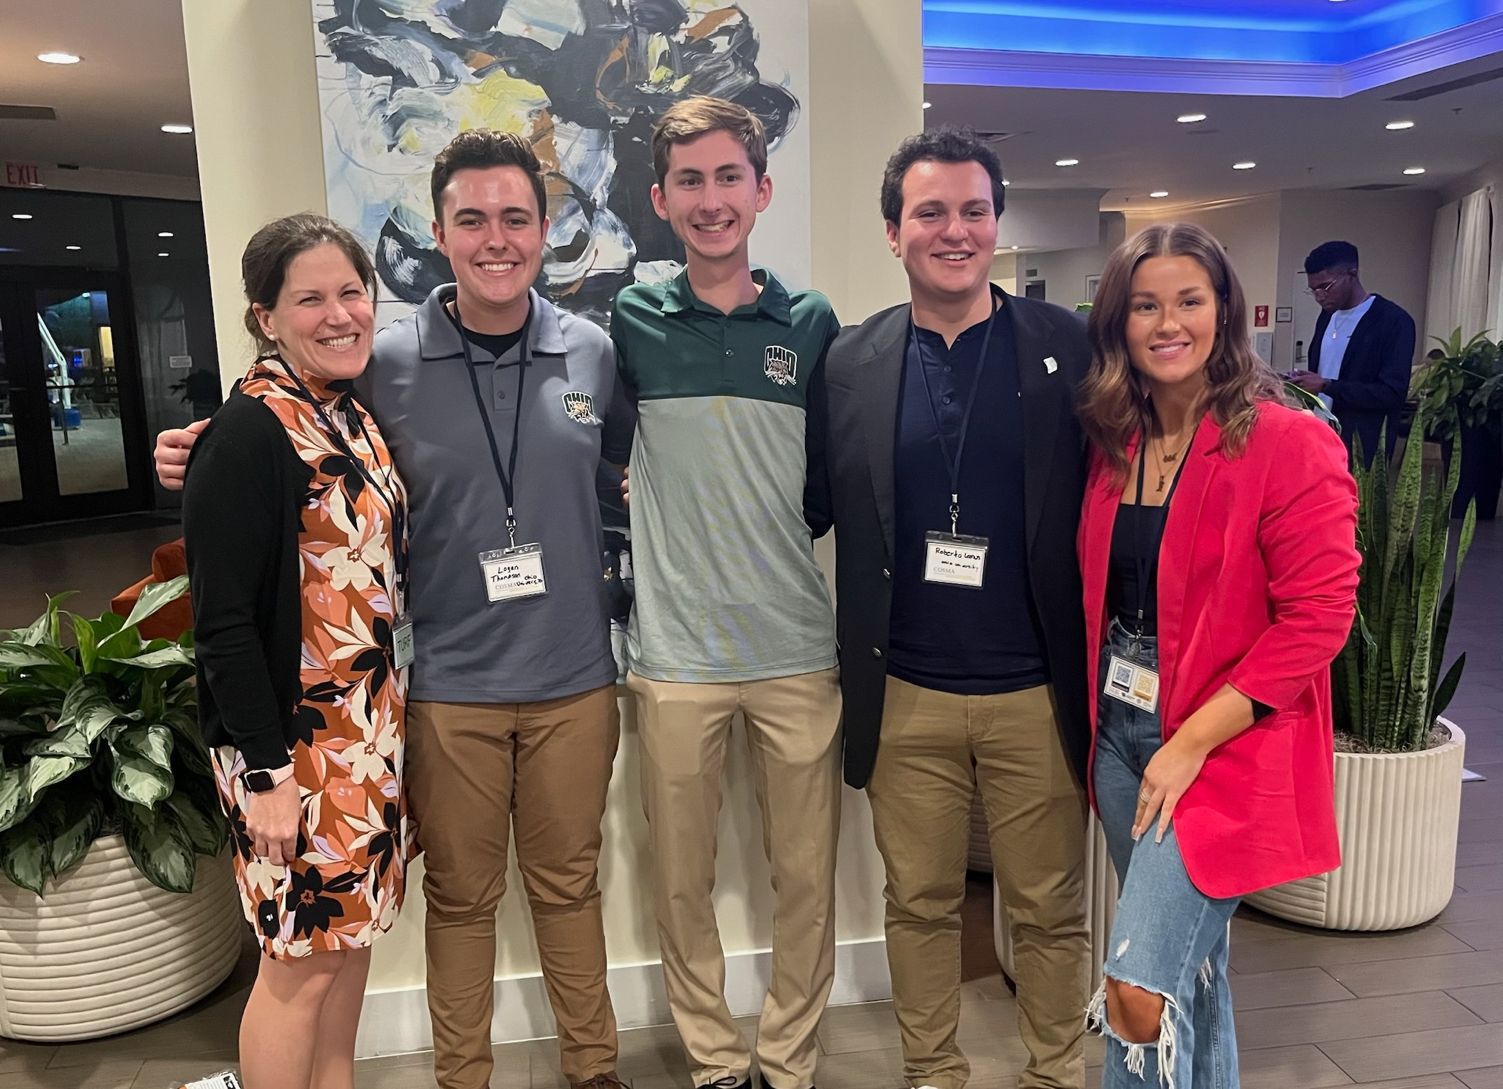 The OHIO  team of Roberto Lemus, Ian Lindstrom, Logan Thompson and Lily Wittman is shown with faculty advisor Annie Valeant .